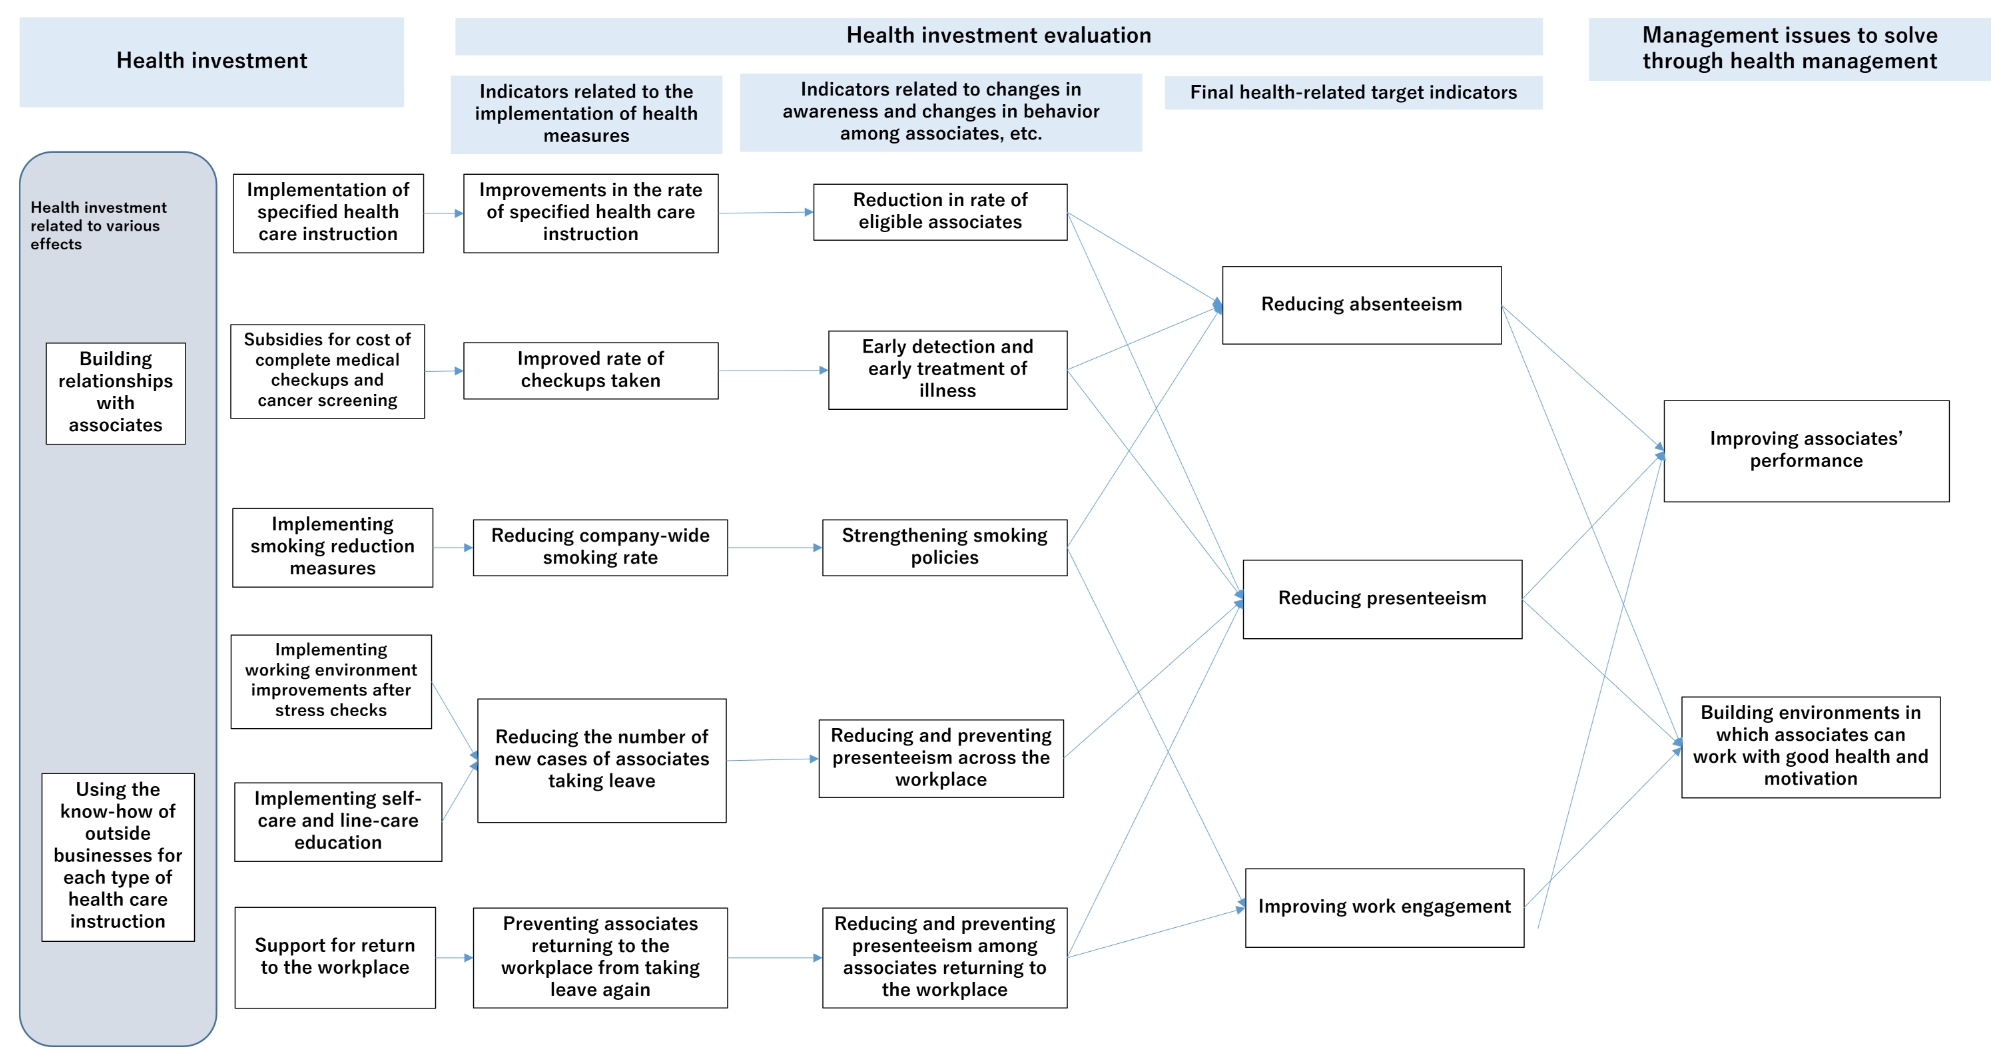 Health management strategy map